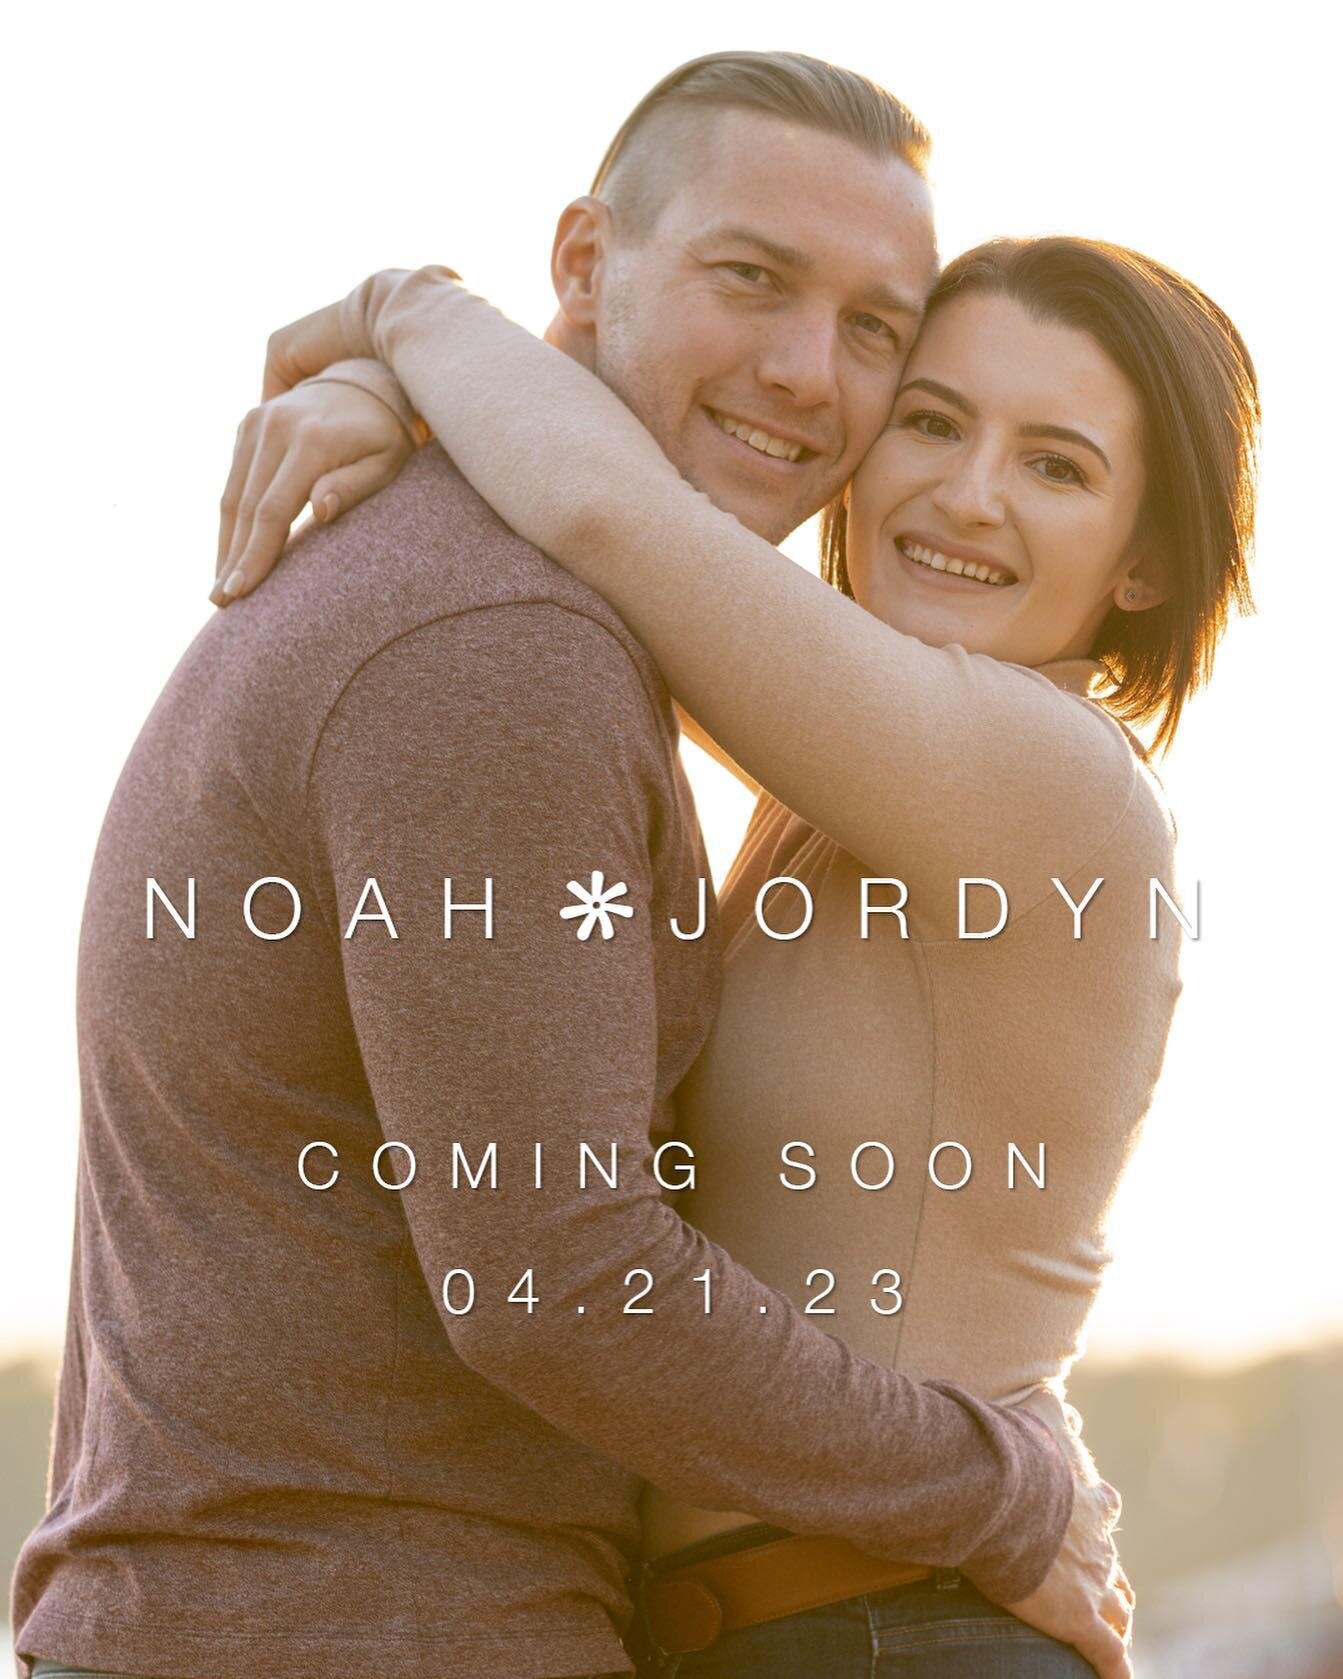 First, it started out as a family photoshoot, and then it turned into something more&hellip;.a new wedding client. Special thanks to @brittney_bree_nicole and @michael_piermarini for introducing us to your friends. We are happy to announce that Jordy